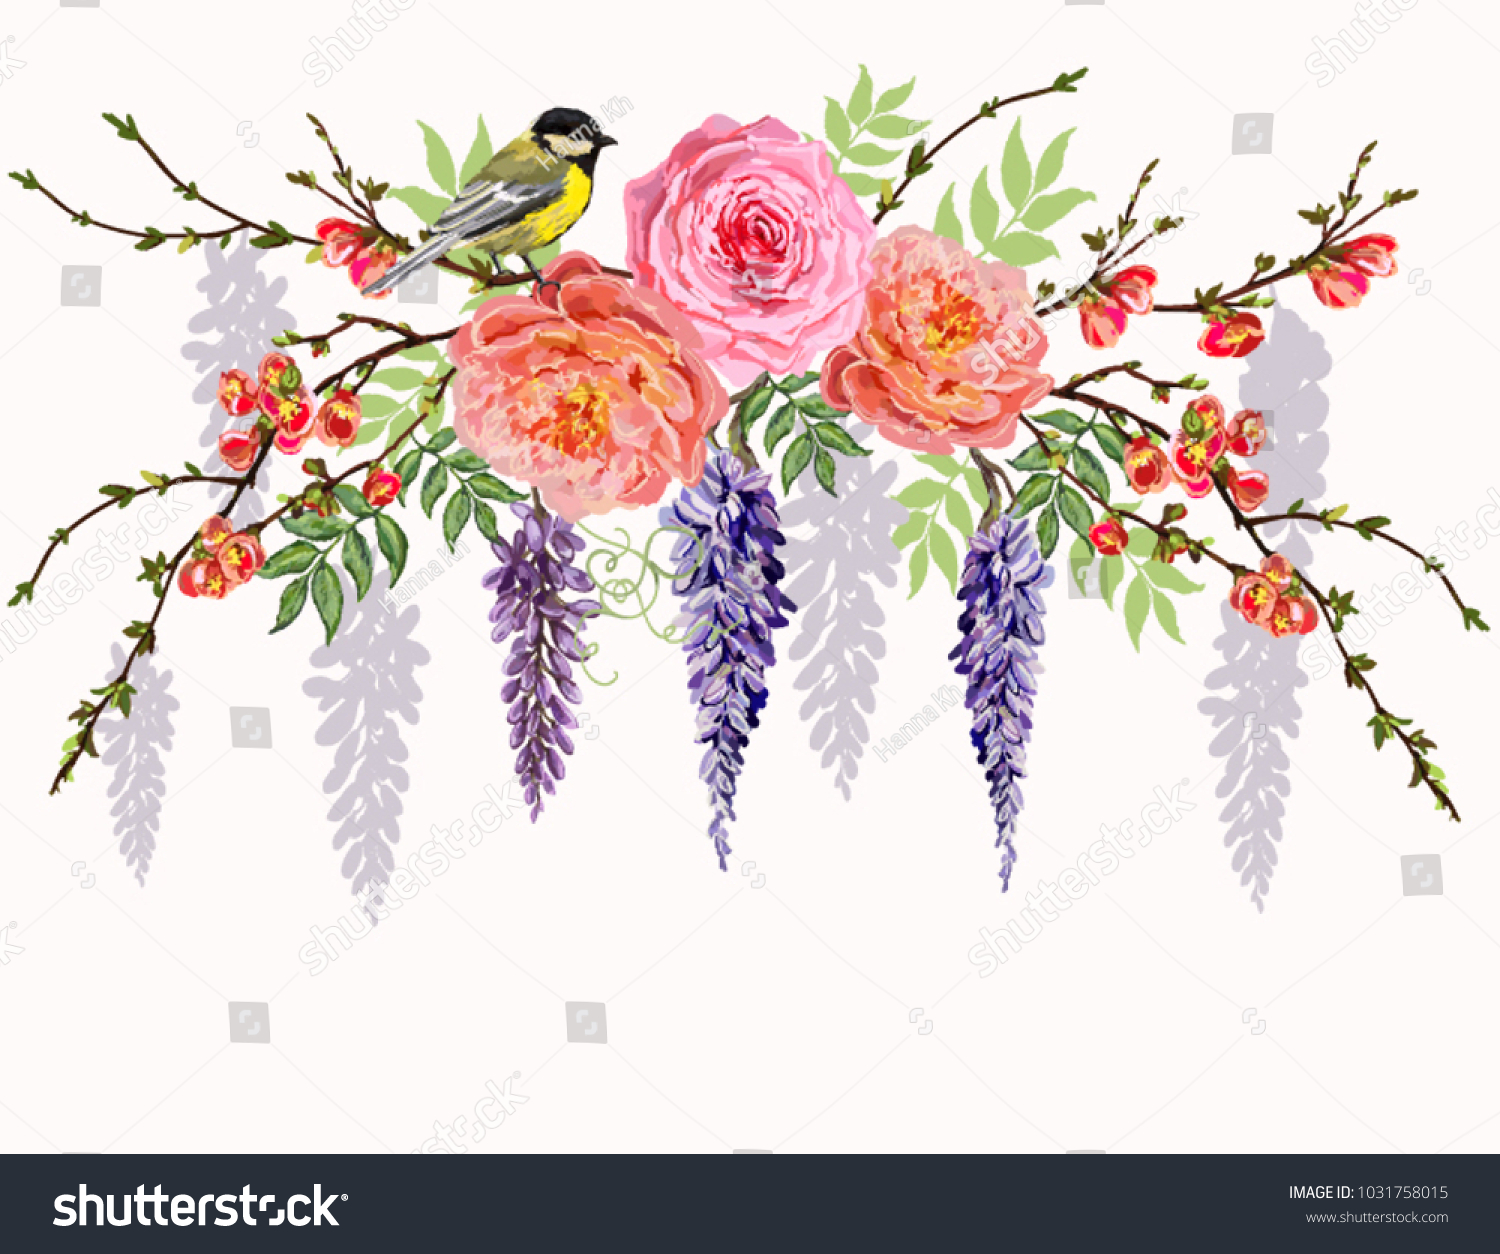 SVG of Beautiful  vector floral summer pattern background with japanese spring branches, roses, peony flowers, bird. Perfect for wallpapers, web page backgrounds, surface textures, textile svg